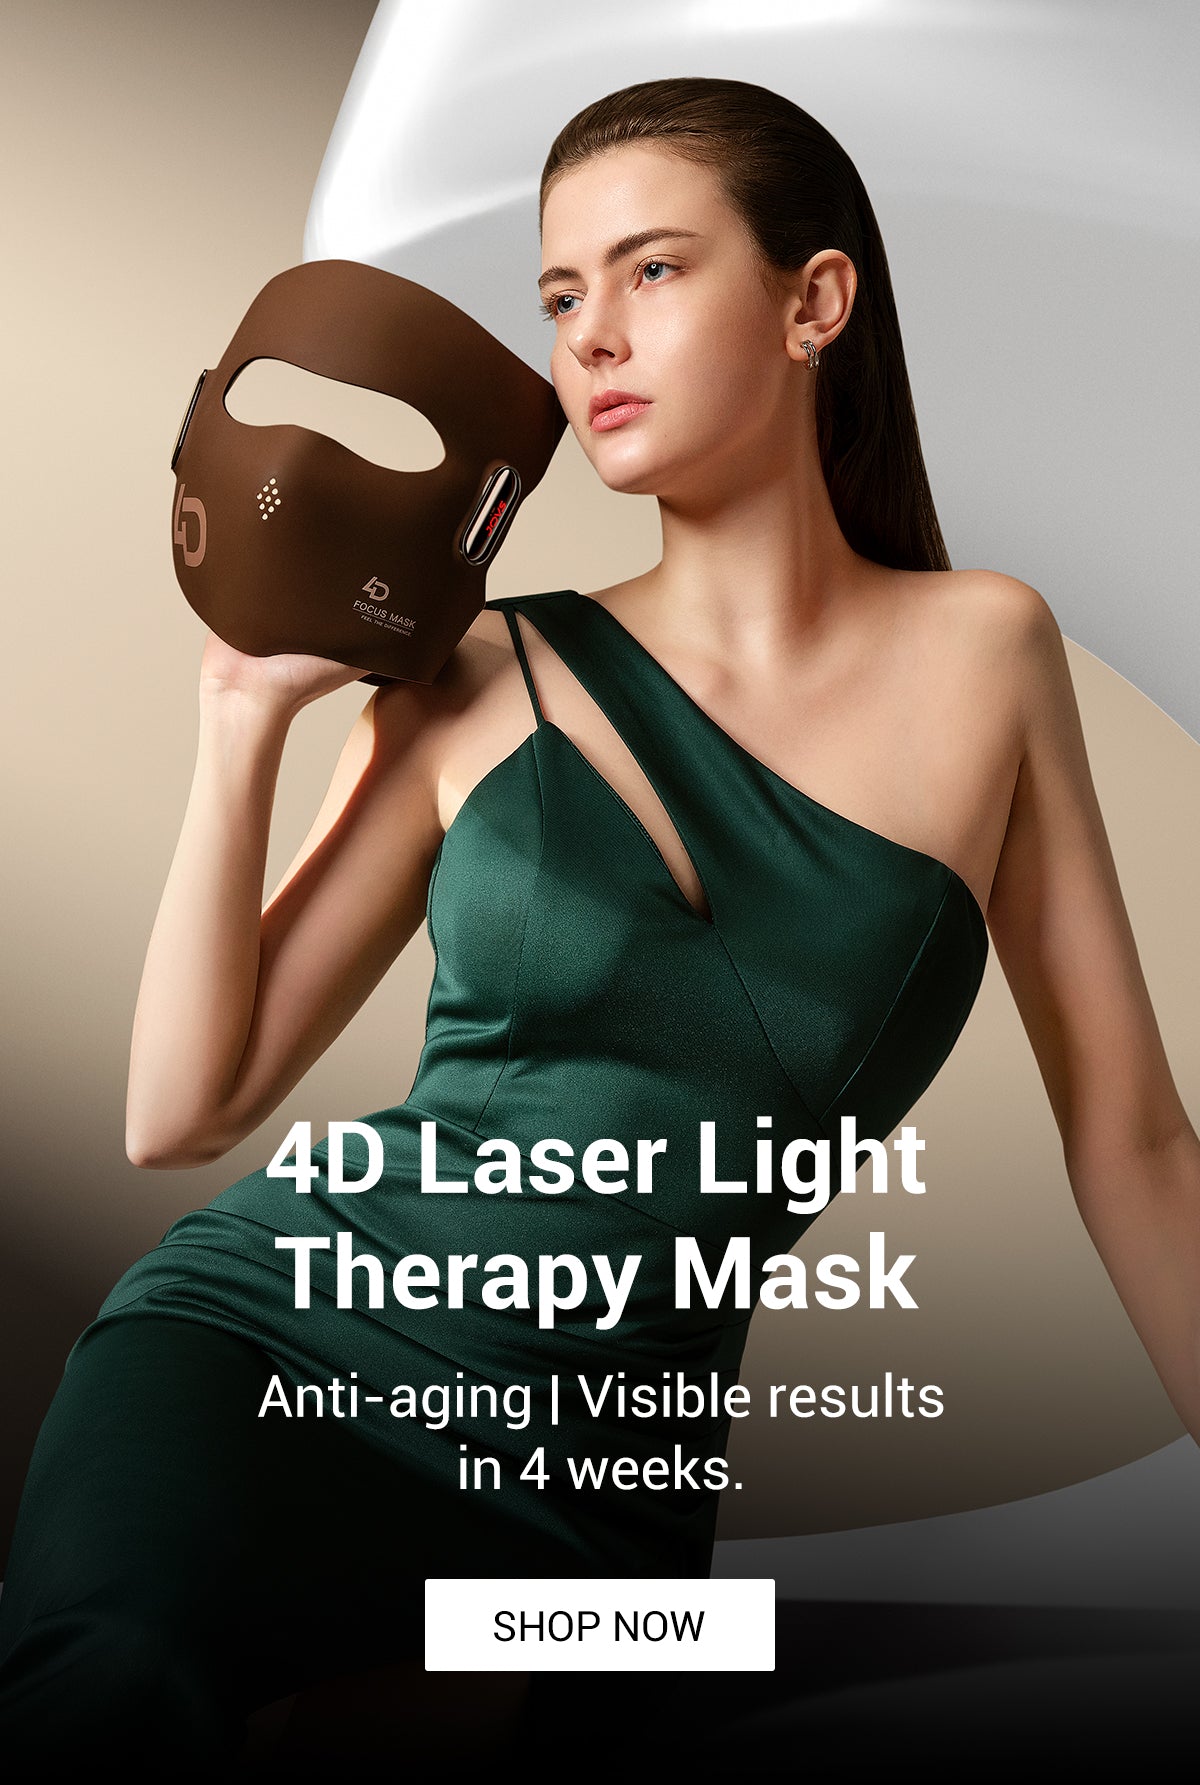 Elegant model presenting the JOVS 4D Laser Light Therapy Mask, promising anti-aging benefits and visible results in just four weeks.